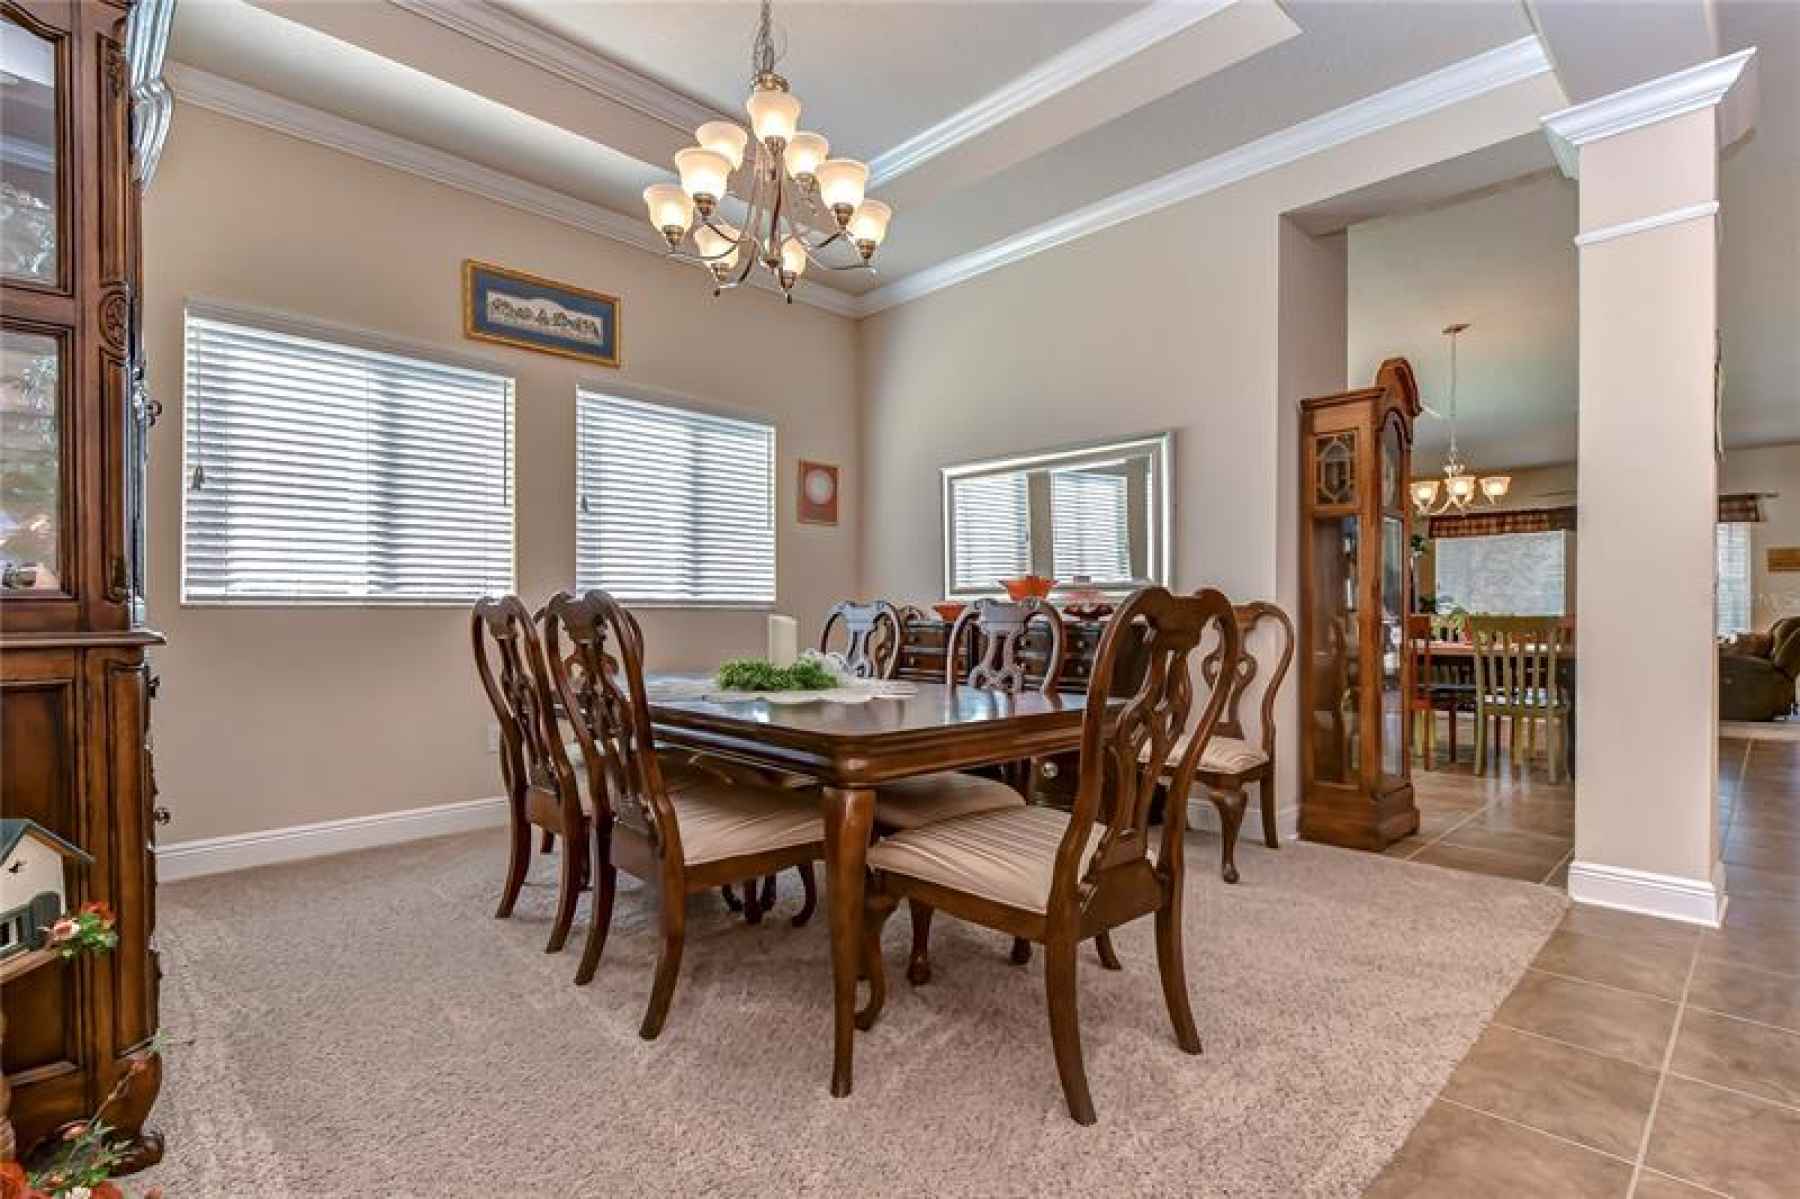 The formal dining room on the left offers a tray ceiling with crown!